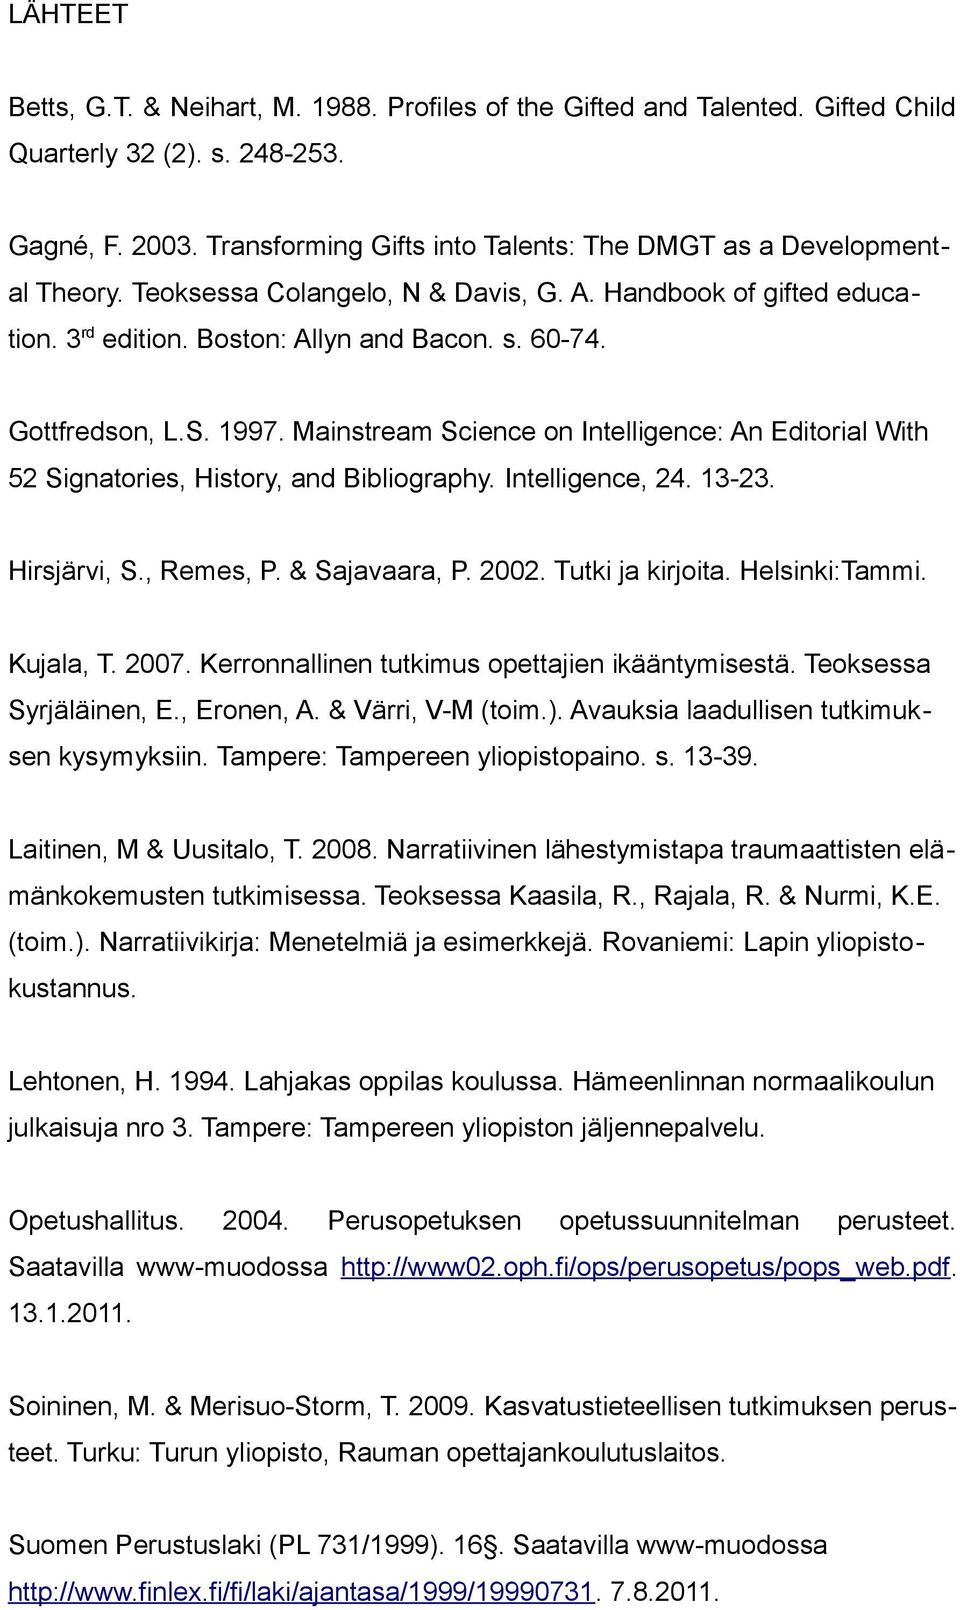 Gottfredson, L.S. 1997. Mainstream Science on Intelligence: An Editorial With 52 Signatories, History, and Bibliography. Intelligence, 24. 13-23. Hirsjärvi, S., Remes, P. & Sajavaara, P. 2002.